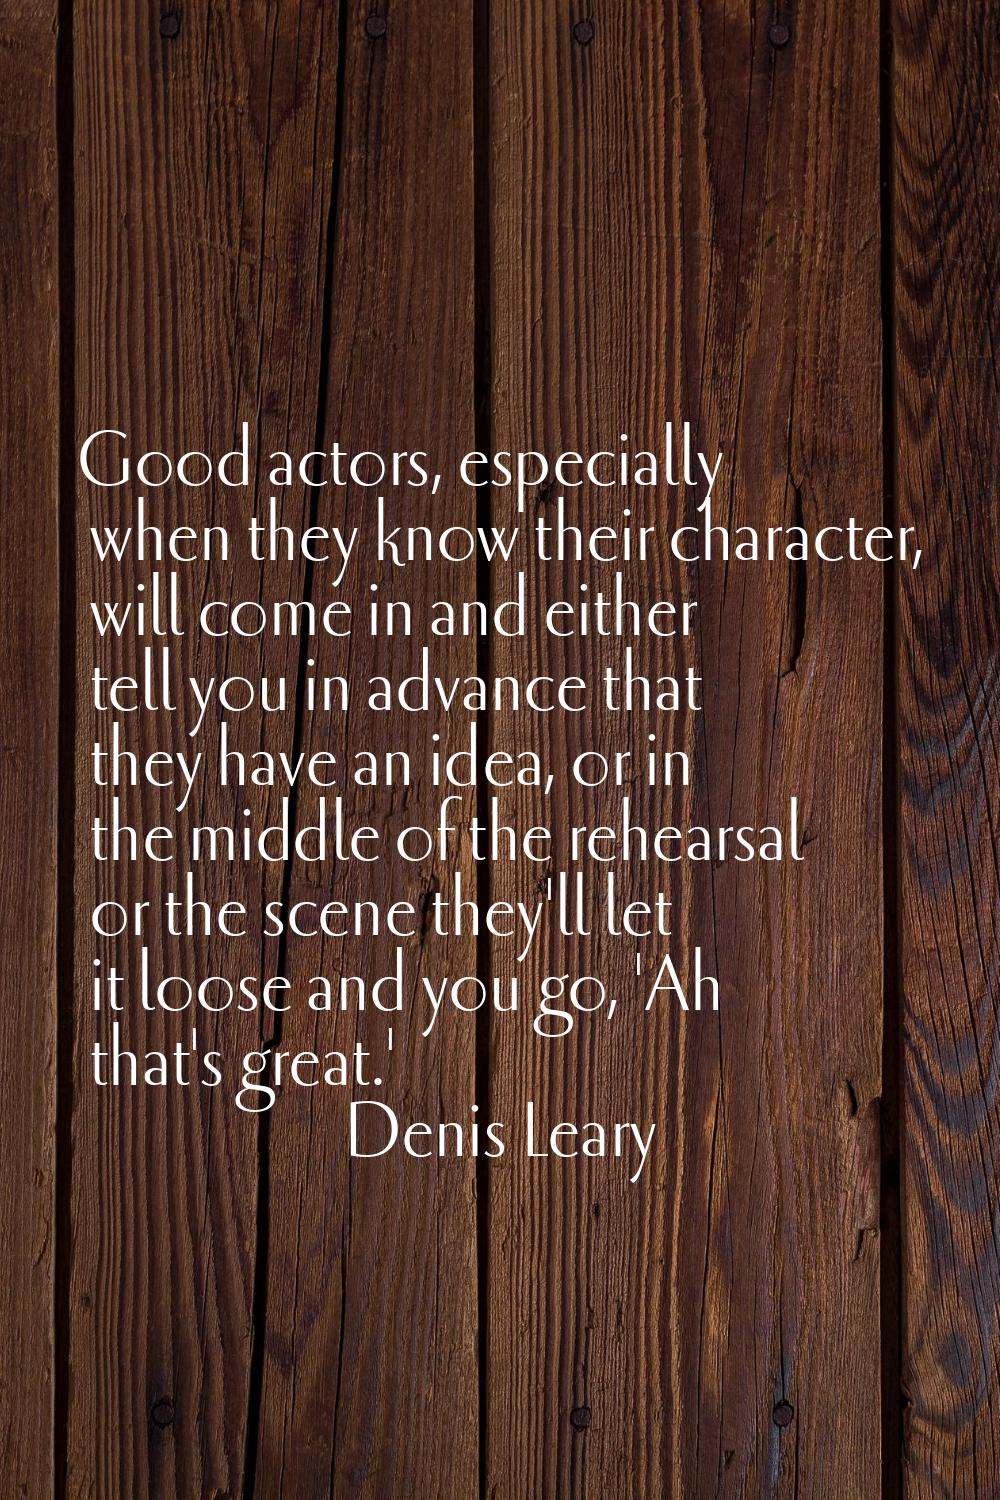 Good actors, especially when they know their character, will come in and either tell you in advance